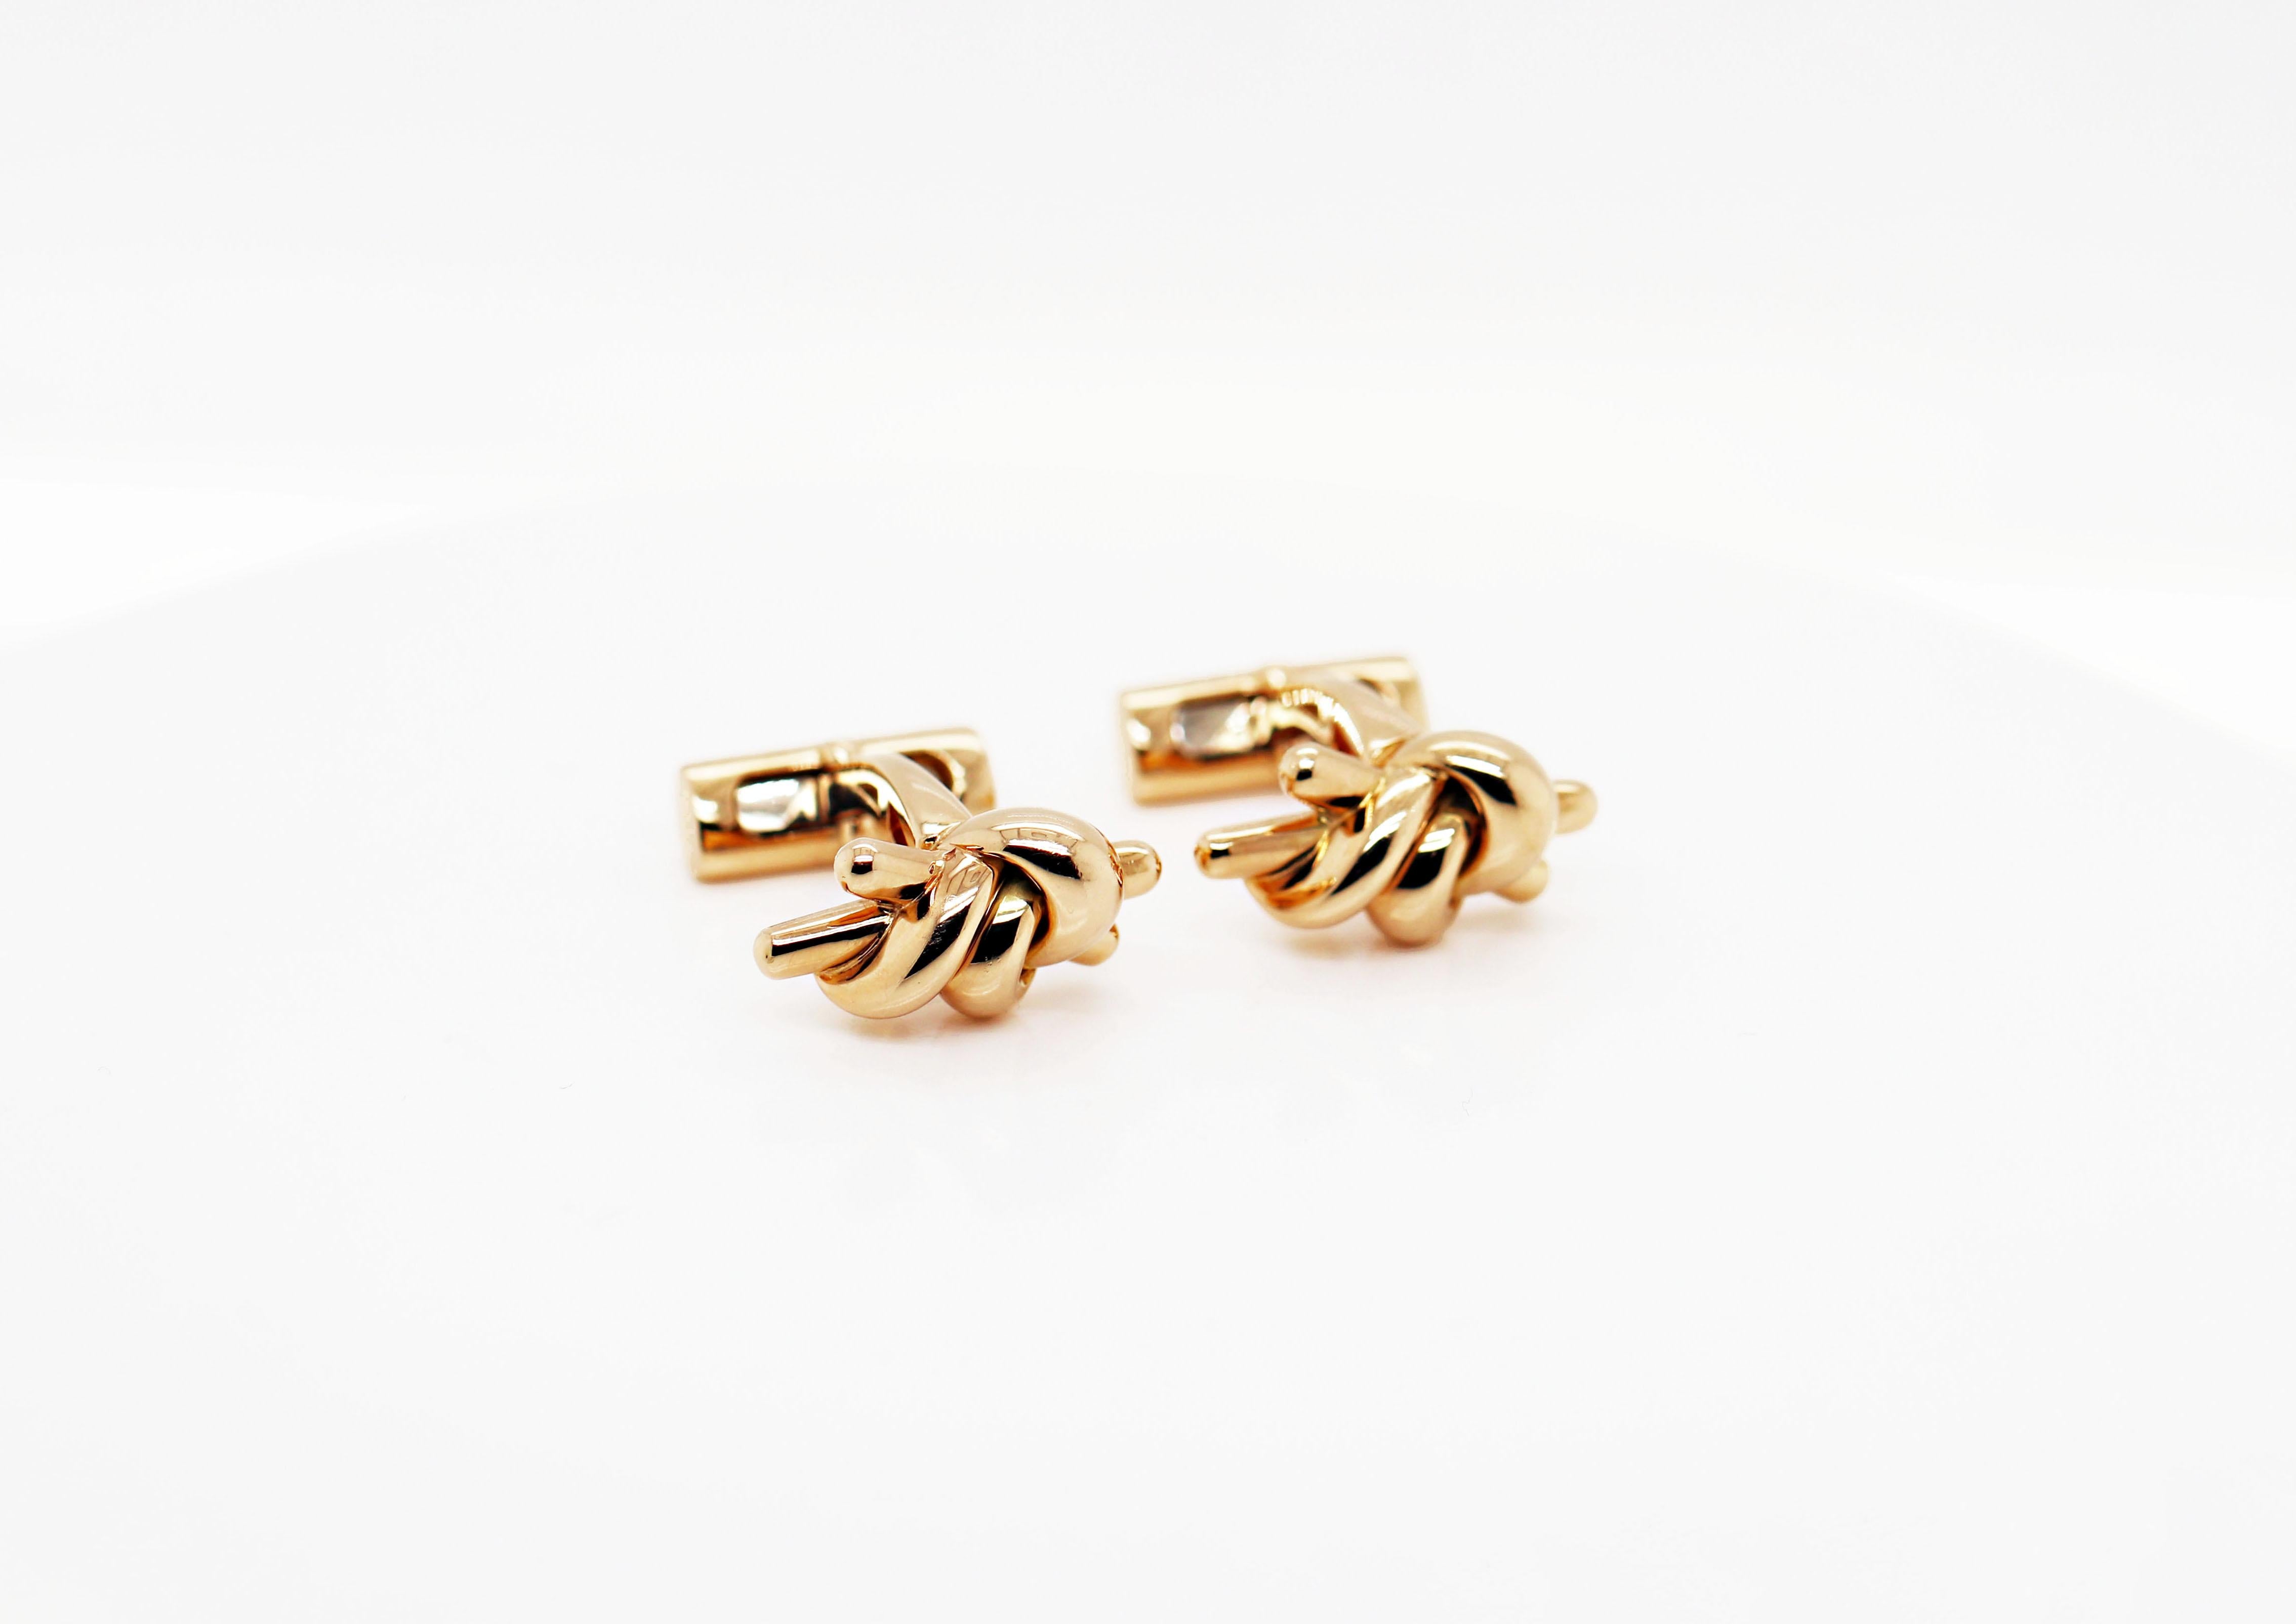 A classic vintage pair of Asprey knot cufflinks made in 18 carat yellow gold with bullet backs. Stamped Asprey on each backing and marked 750, Made in Italy, Asprey.